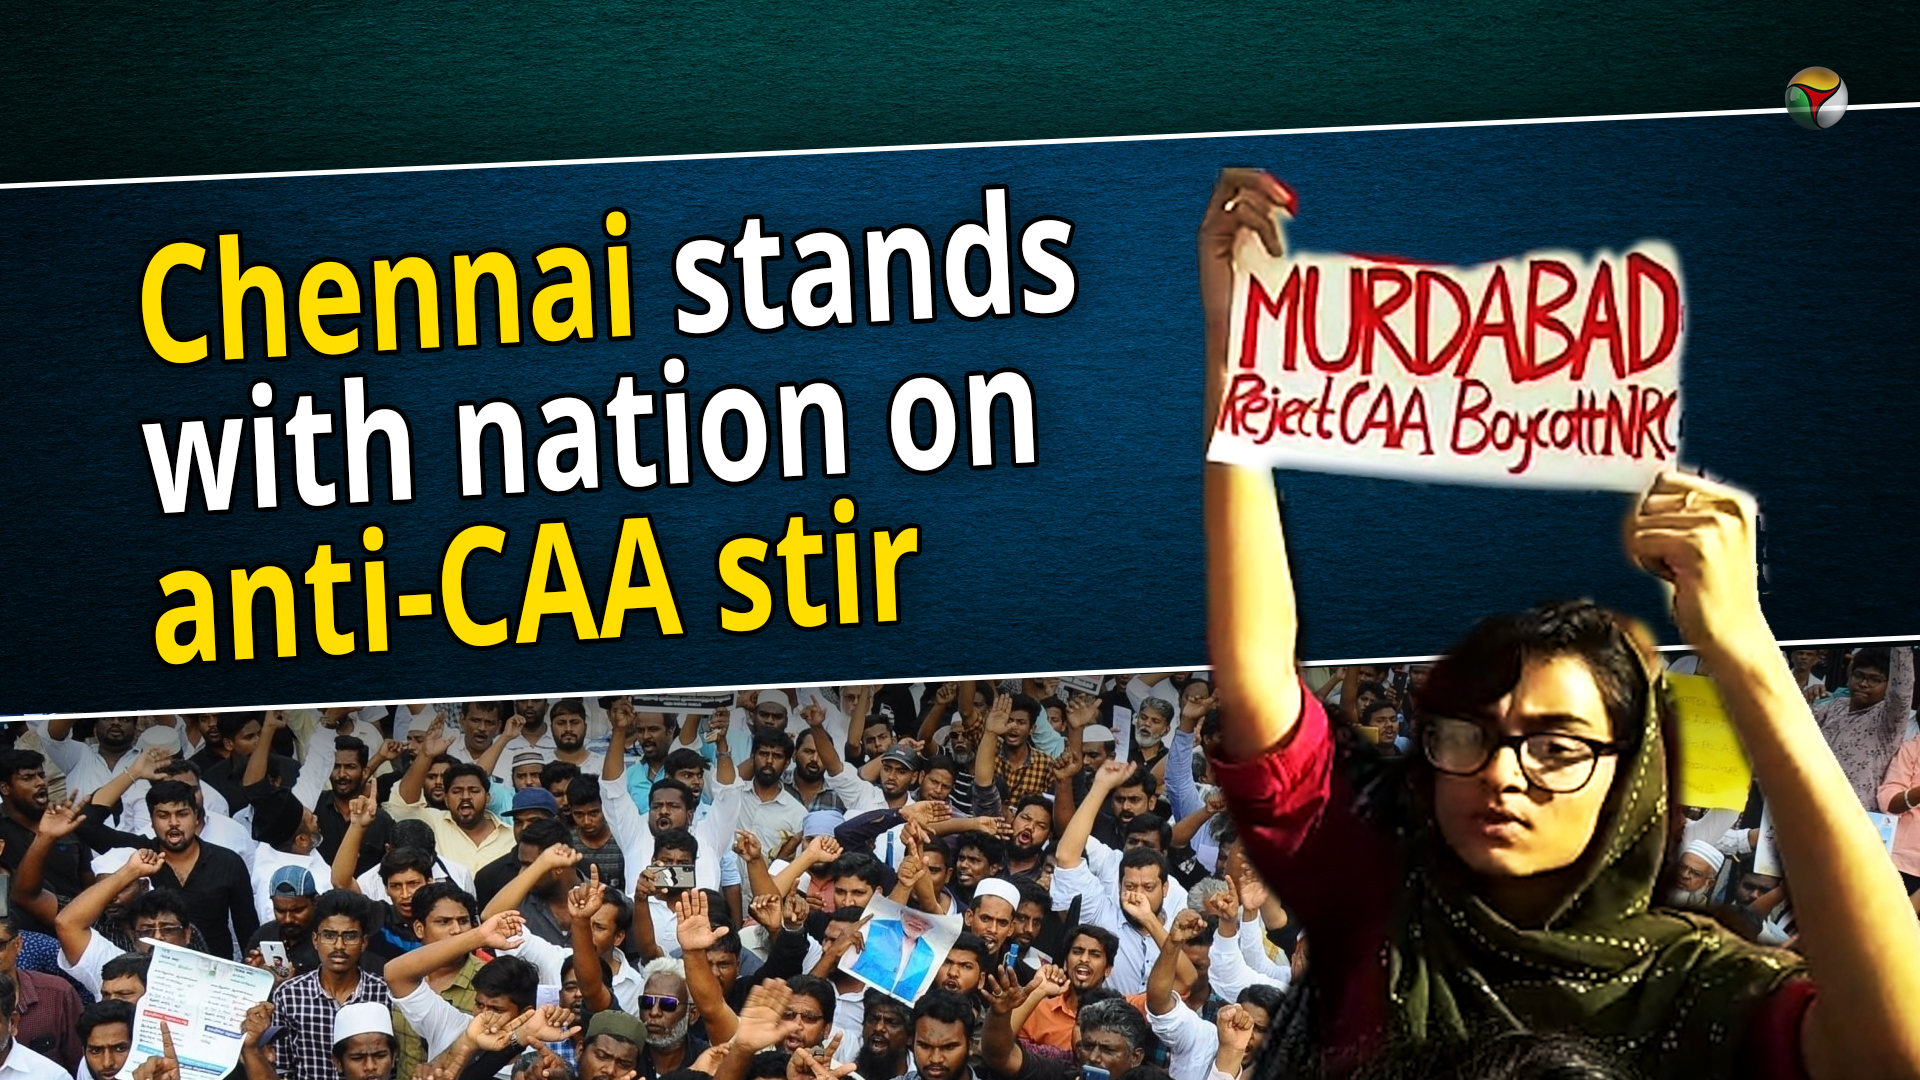 Chennai stands with nation on anti-CAA stir